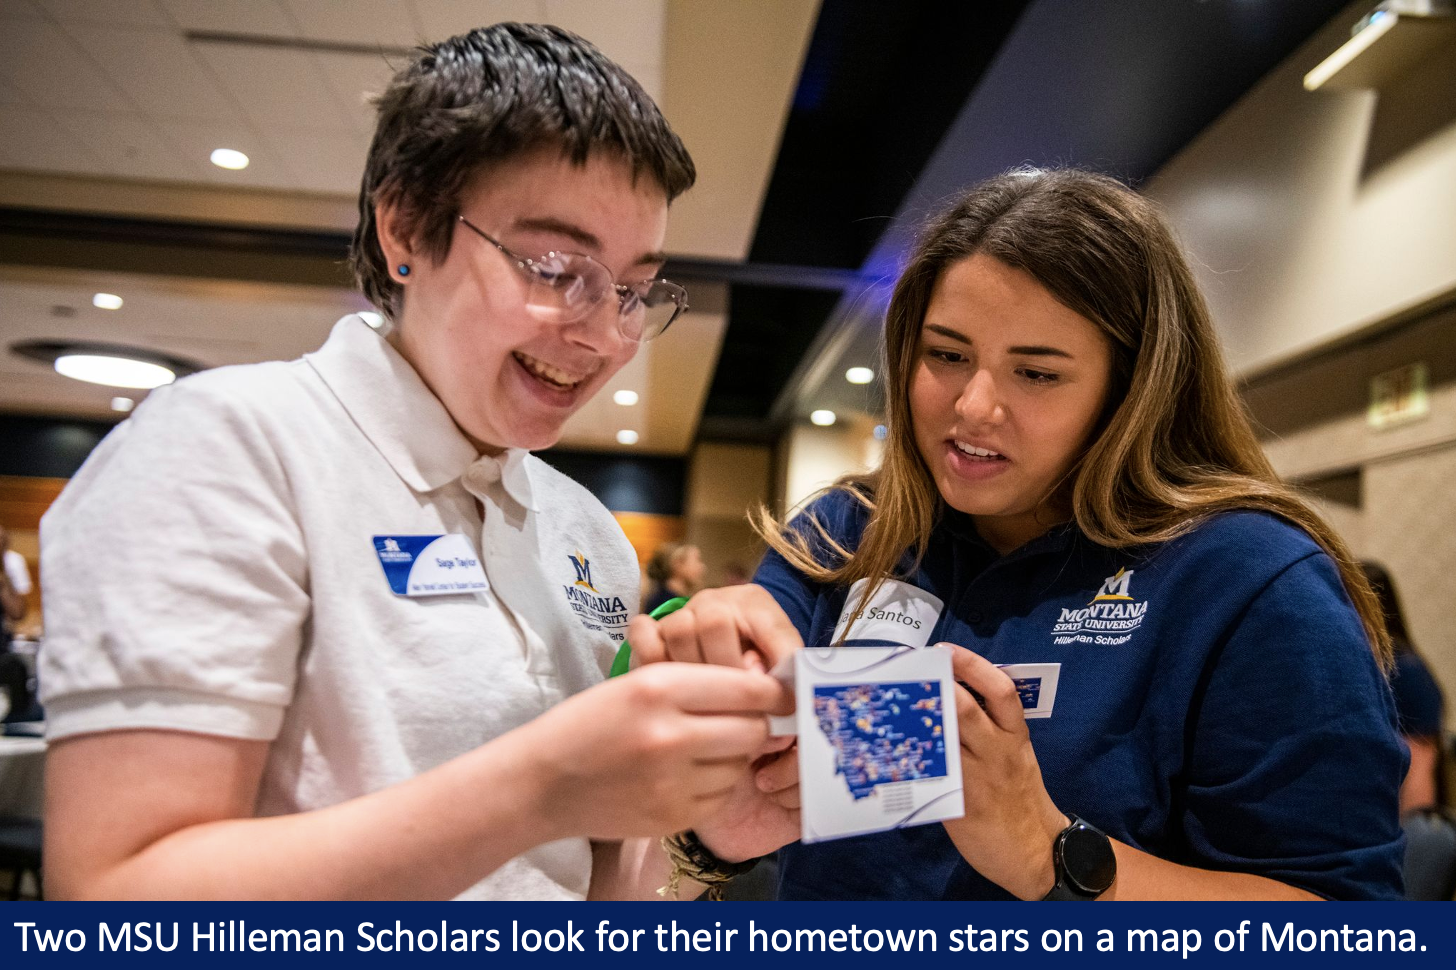 Students look for their hometowns on a map